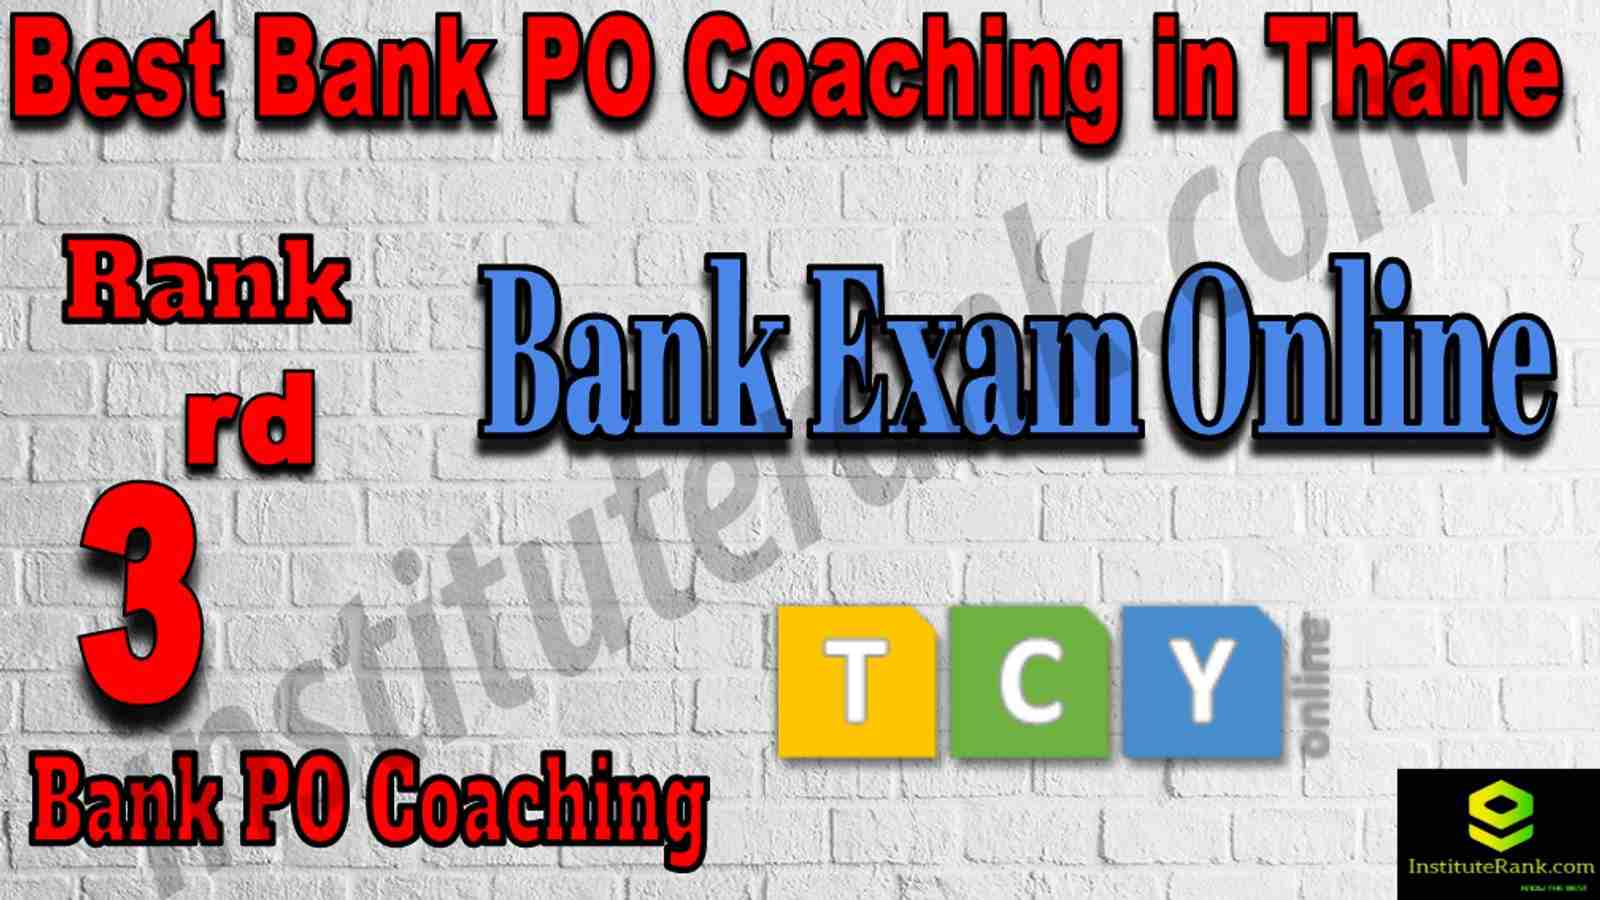 3rd Best Bank PO Coaching in Thane